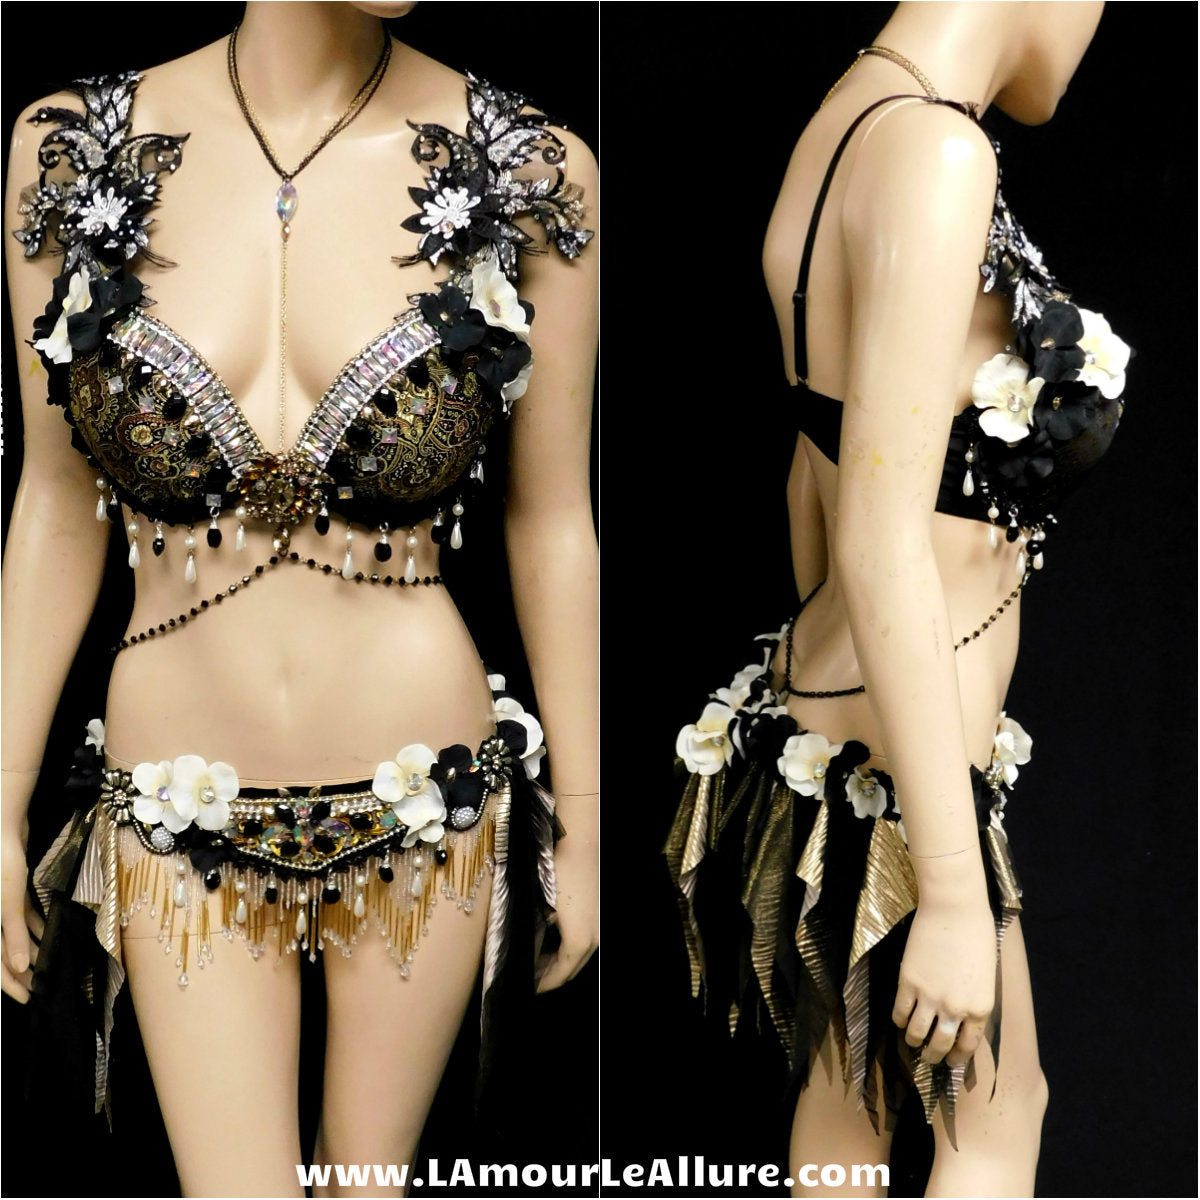 Ready to Ship 36D Medium - Black and Gold Gypsy Forest Fairy